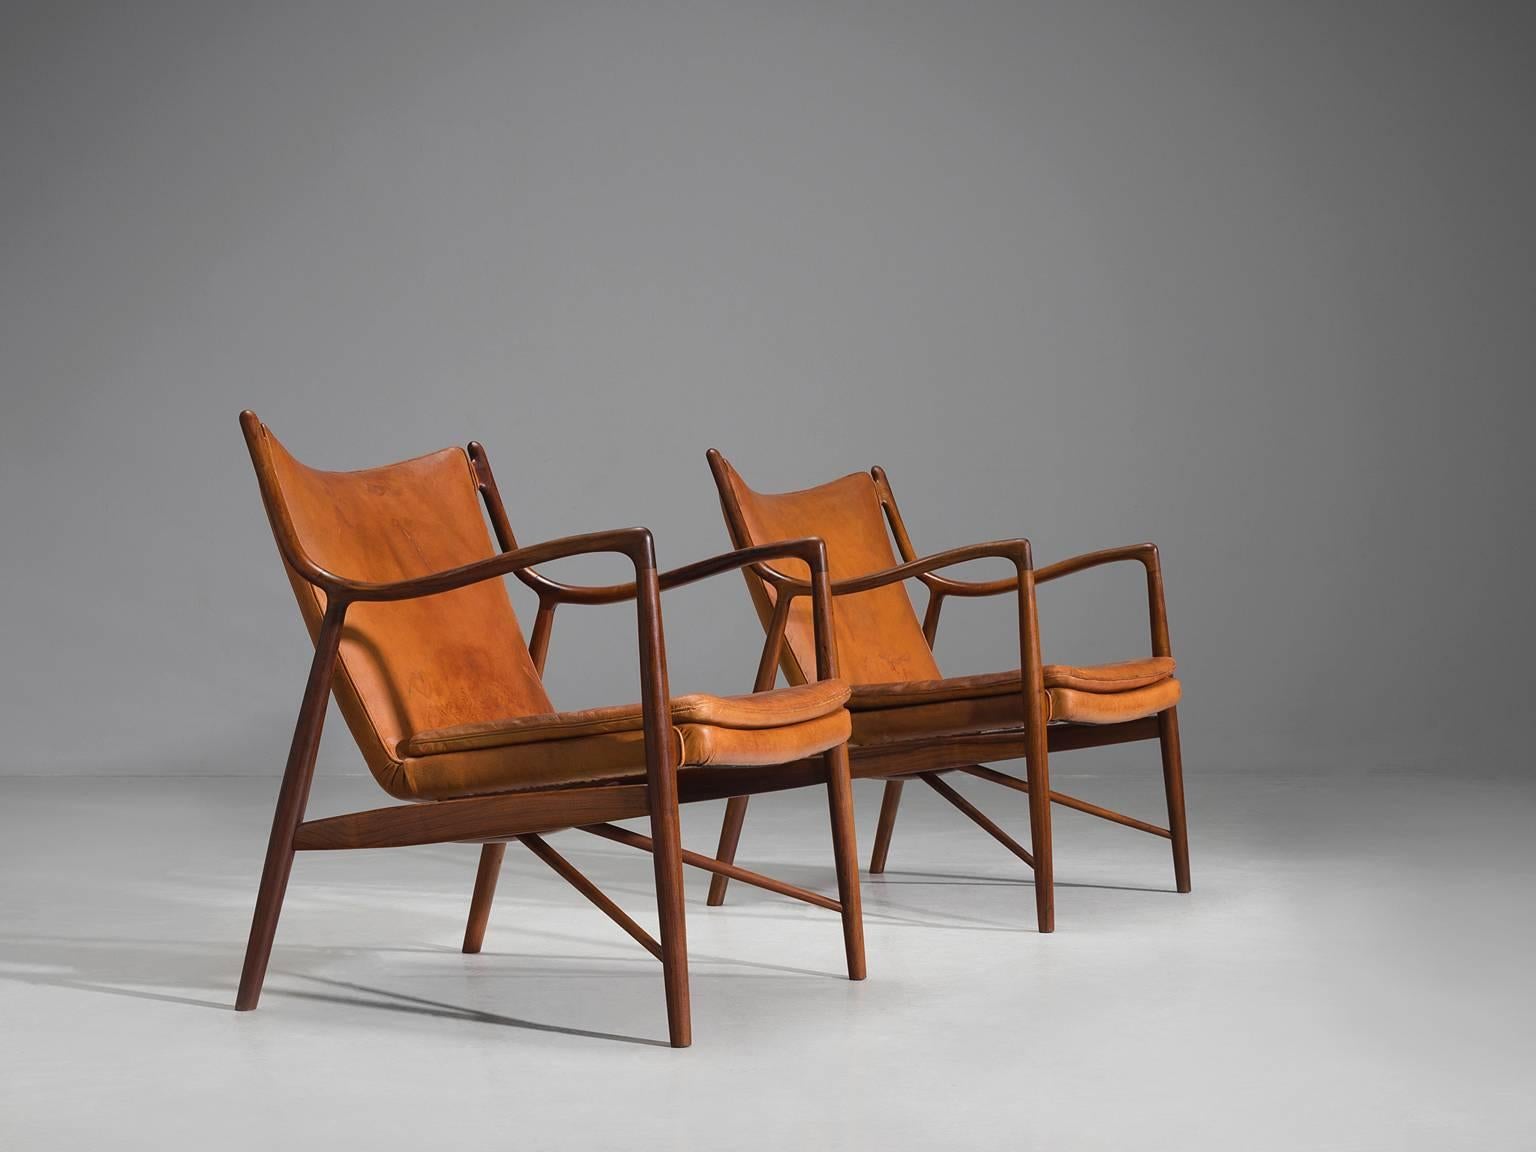 Finn Juhl for Niels Vodder, pair of NV45's, rosewood and cognac leather, Denmark, design 1945, production 1950s. 

This set of early NV45 chairs by Finn Juhl and Niels Vodder are executed in cognac leather and solid rosewood. The master woodworker